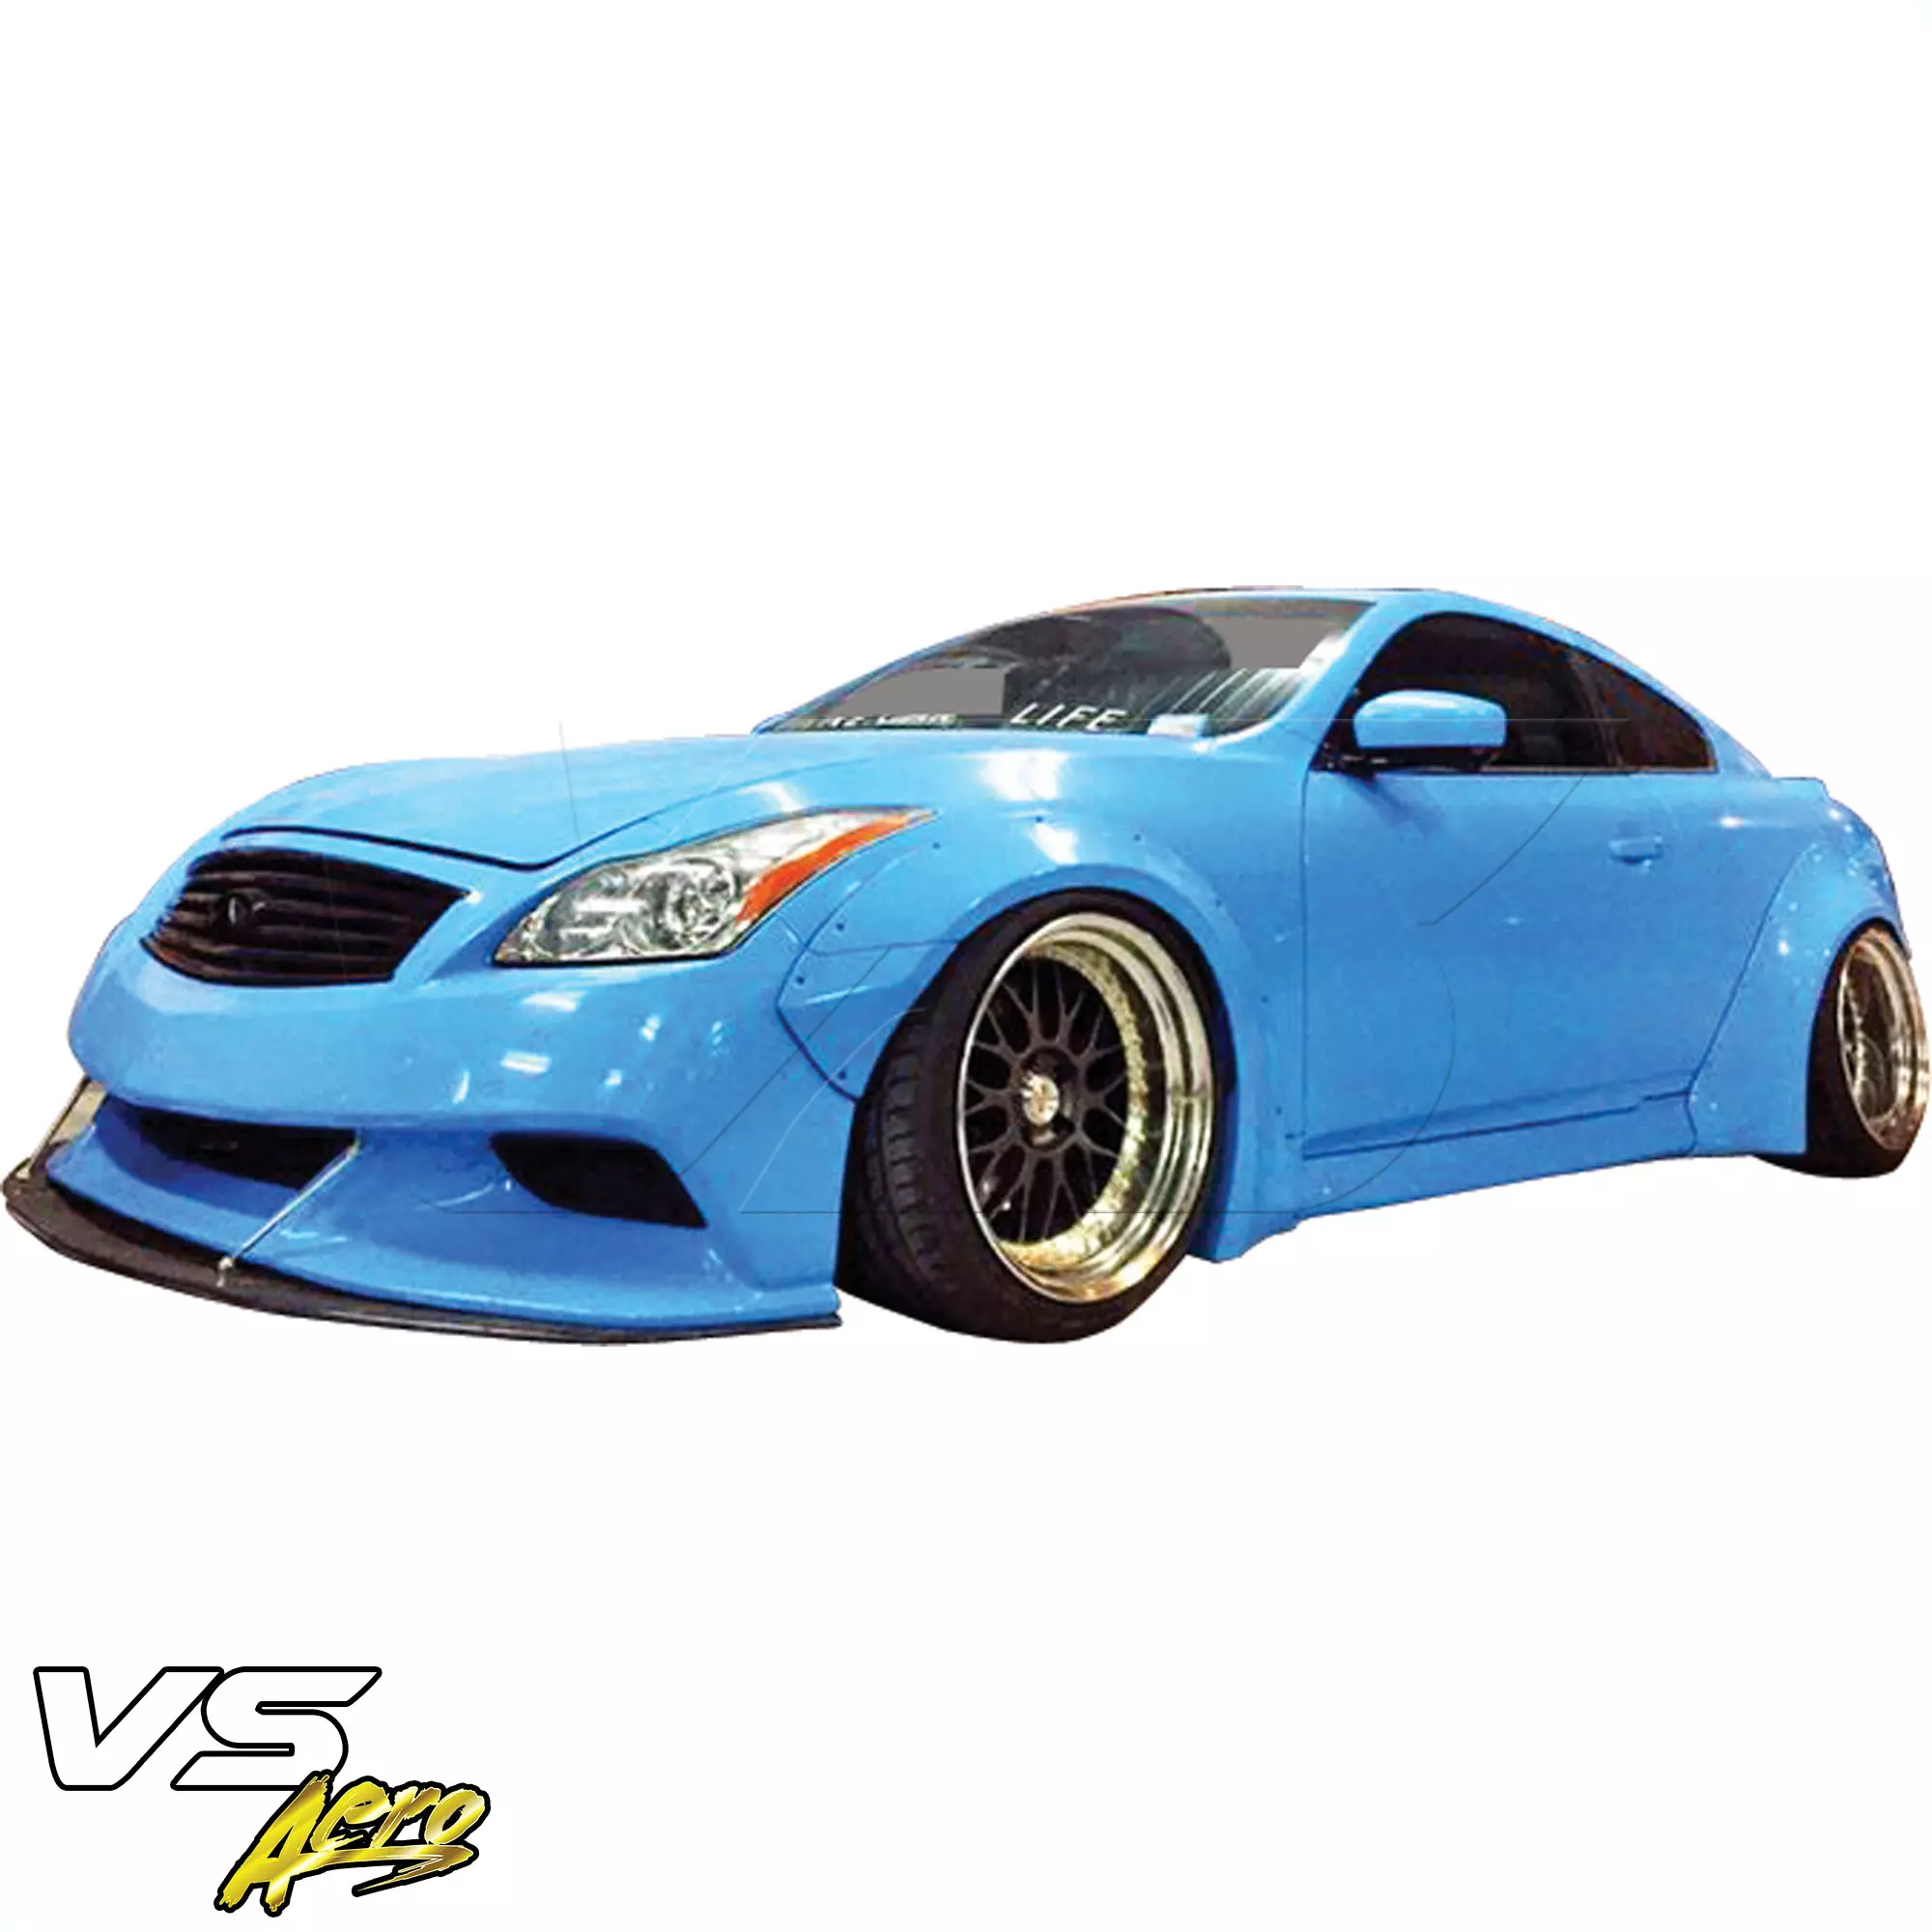 VSaero FRP LBPE Wide Body Fender Flares (front) 4pc > Infiniti G37 Coupe 2008-2015 > 2dr Coupe - Image 40